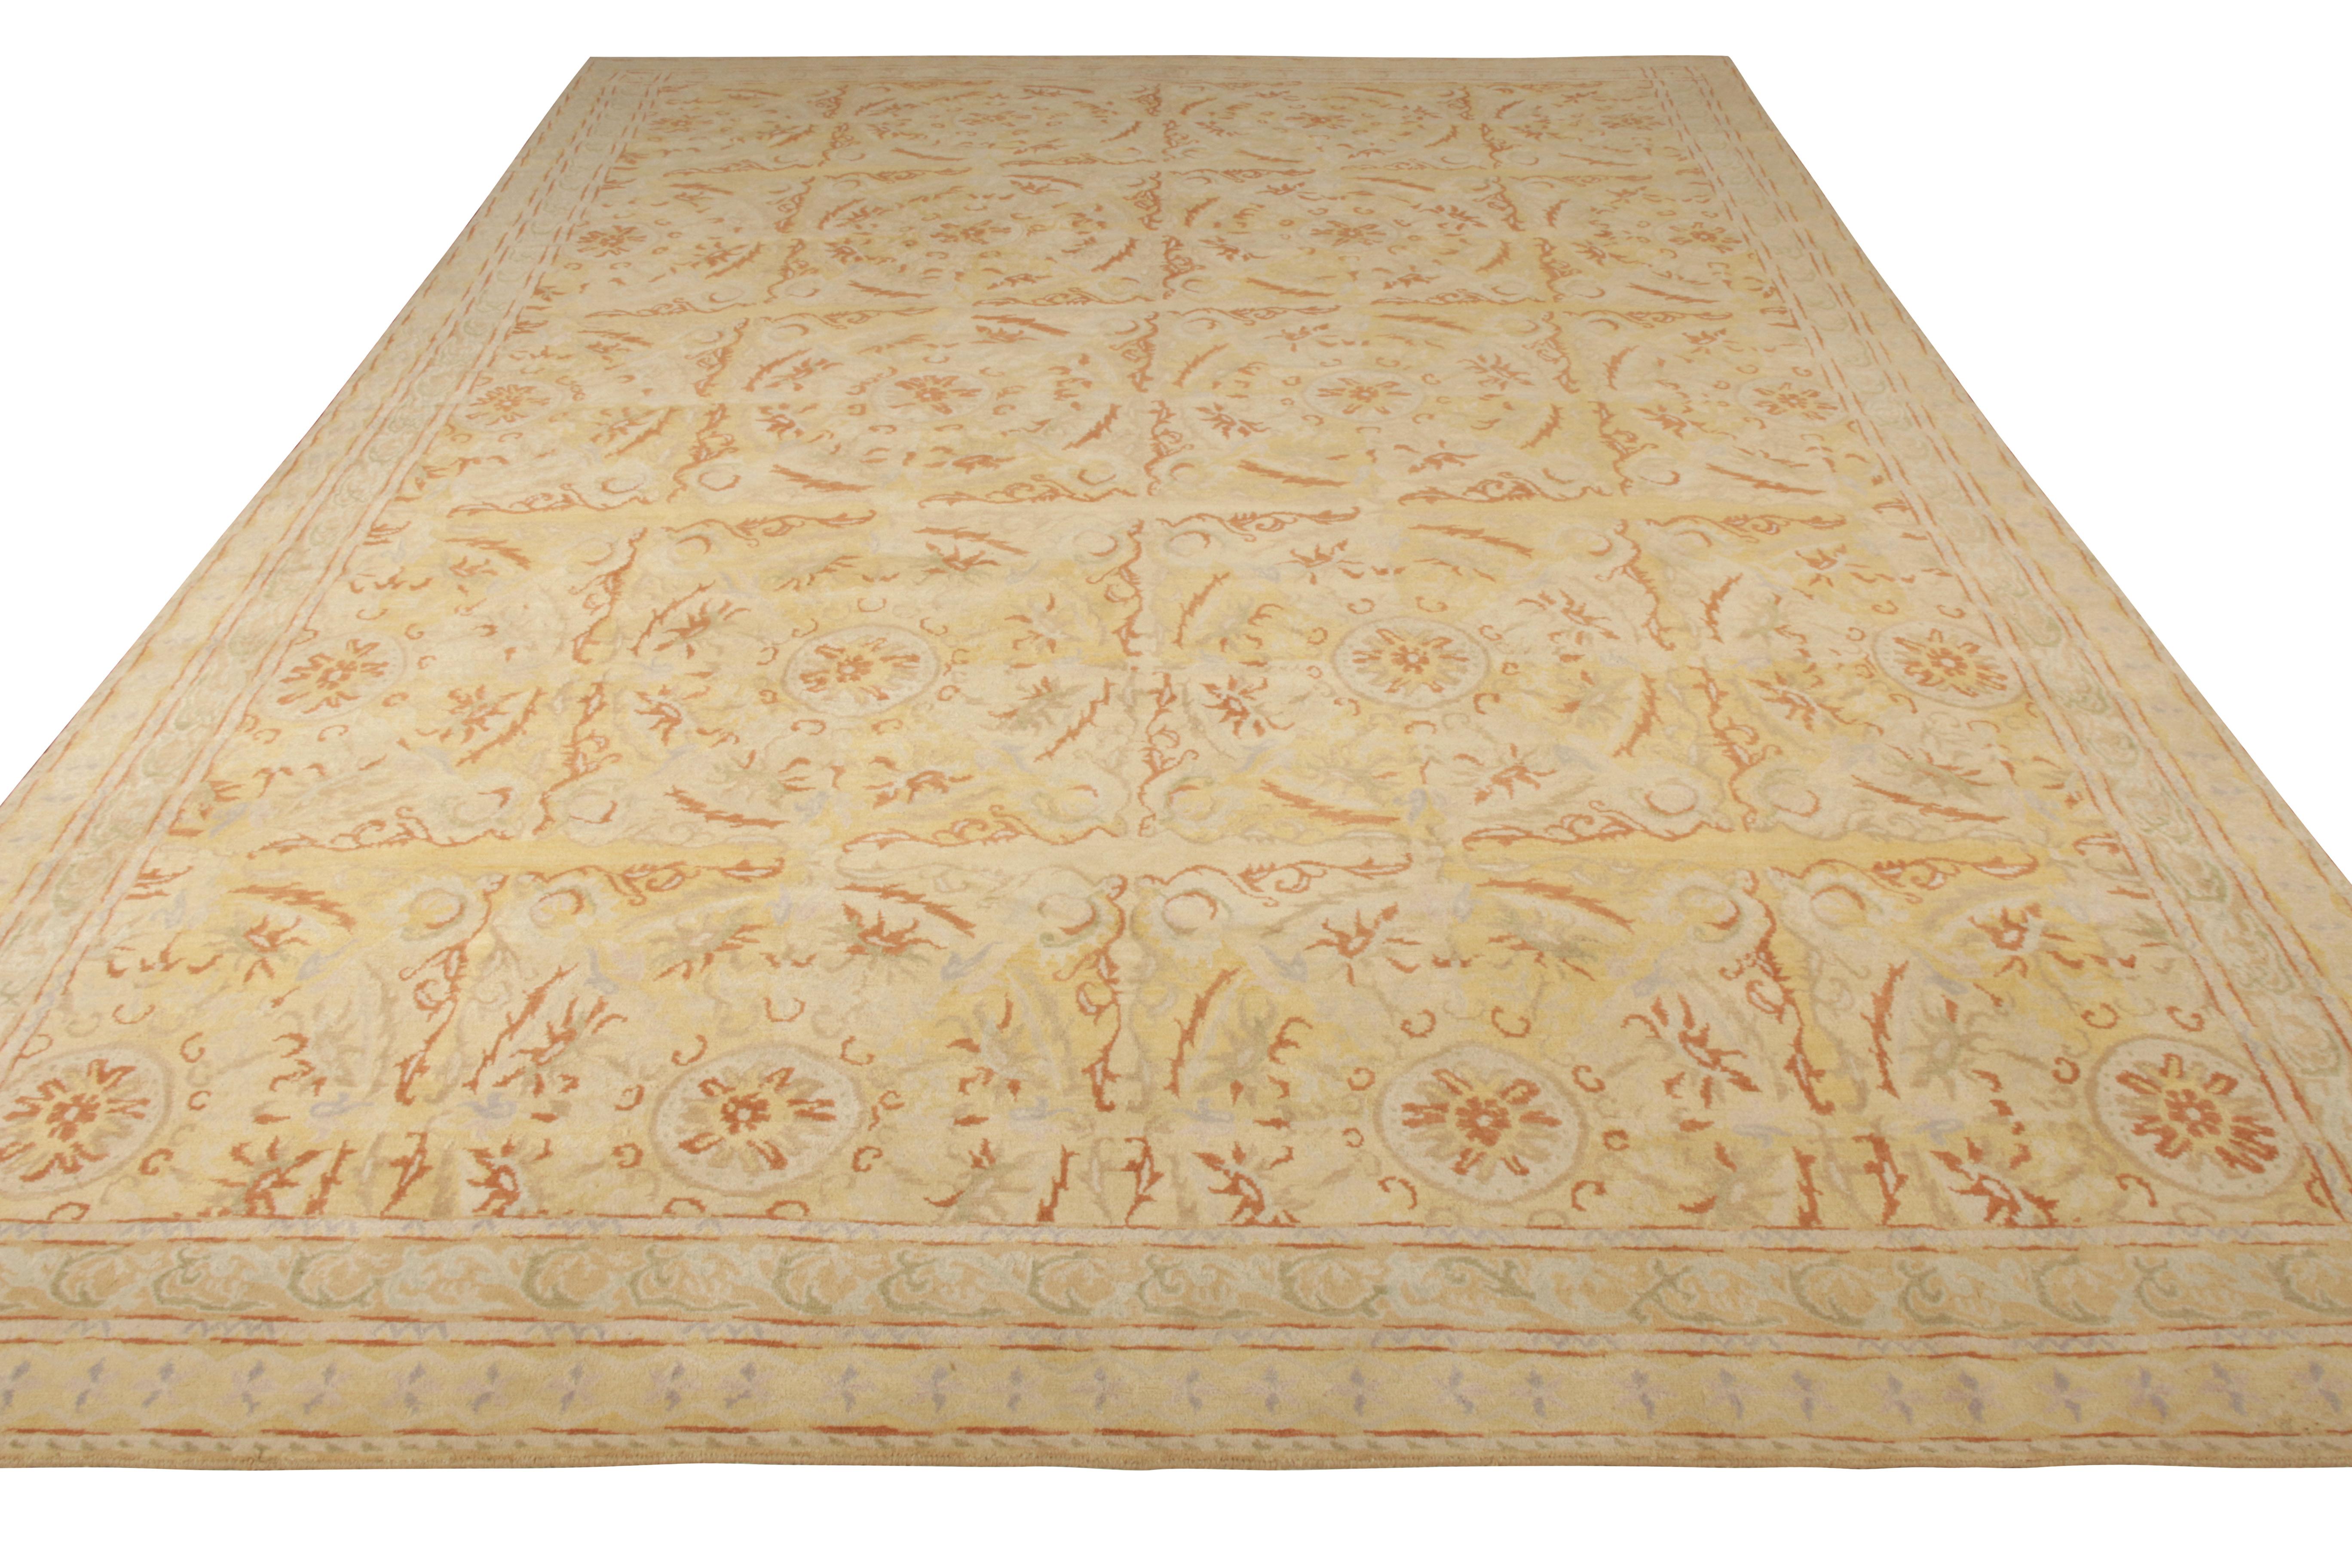  Inspired by Spanish design, Rug & Kilim presents this 10x14 piece from its European collection featuring floral patterns in repetition for a gorgeous sense of movement. The pattern relishes transitional aesthetics in warm beige & cream tones